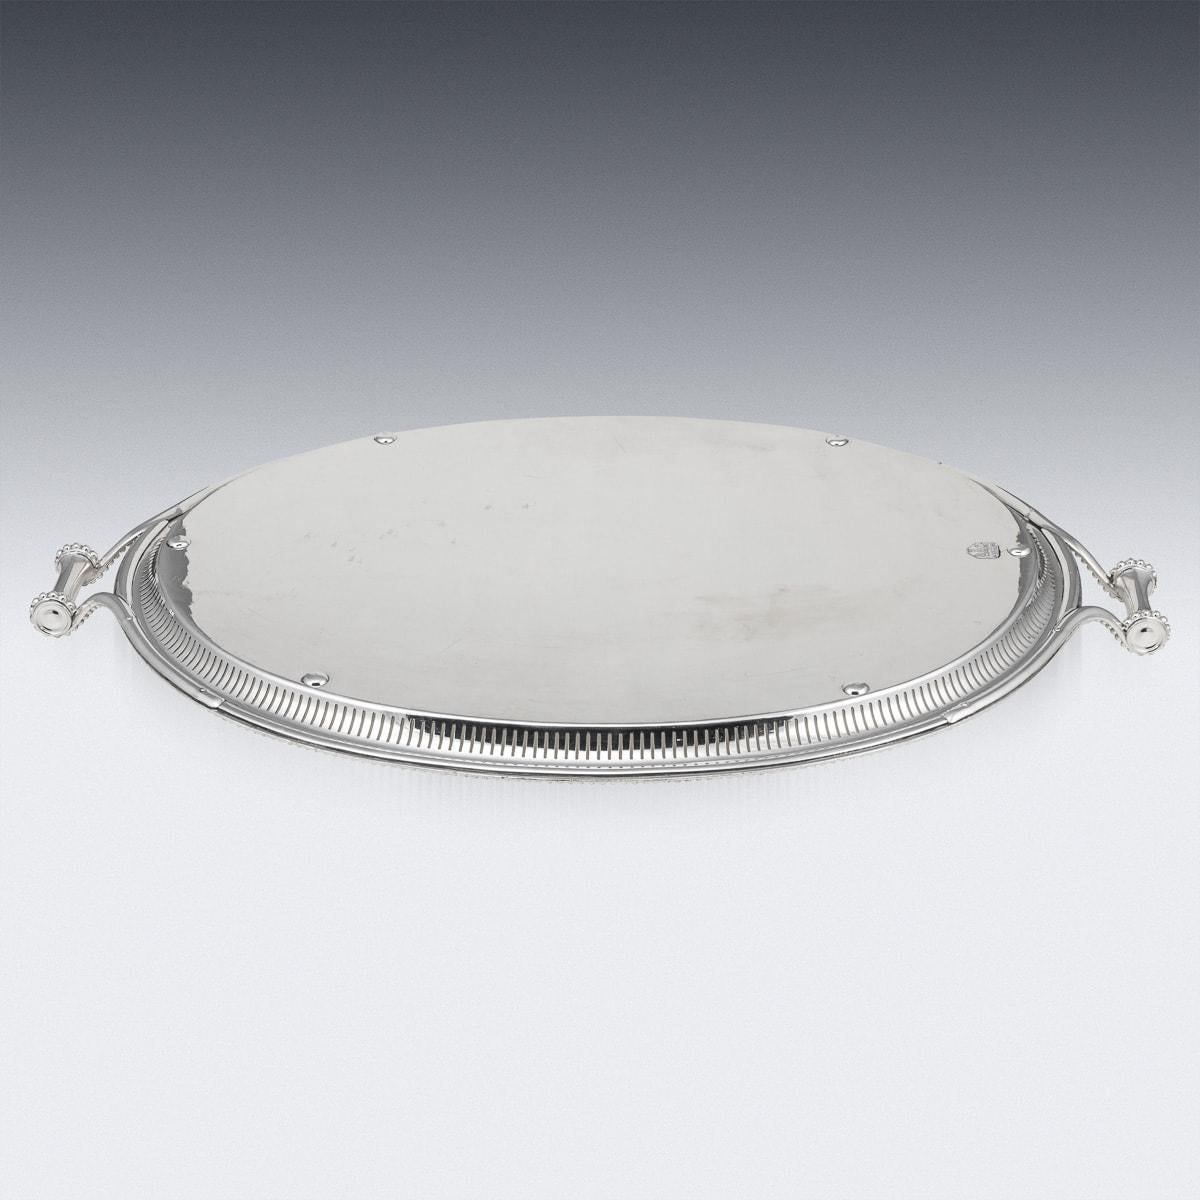 Other Antique 20th Century Silver Plated Serving Tray, James Dixon & Sons c.1900 For Sale